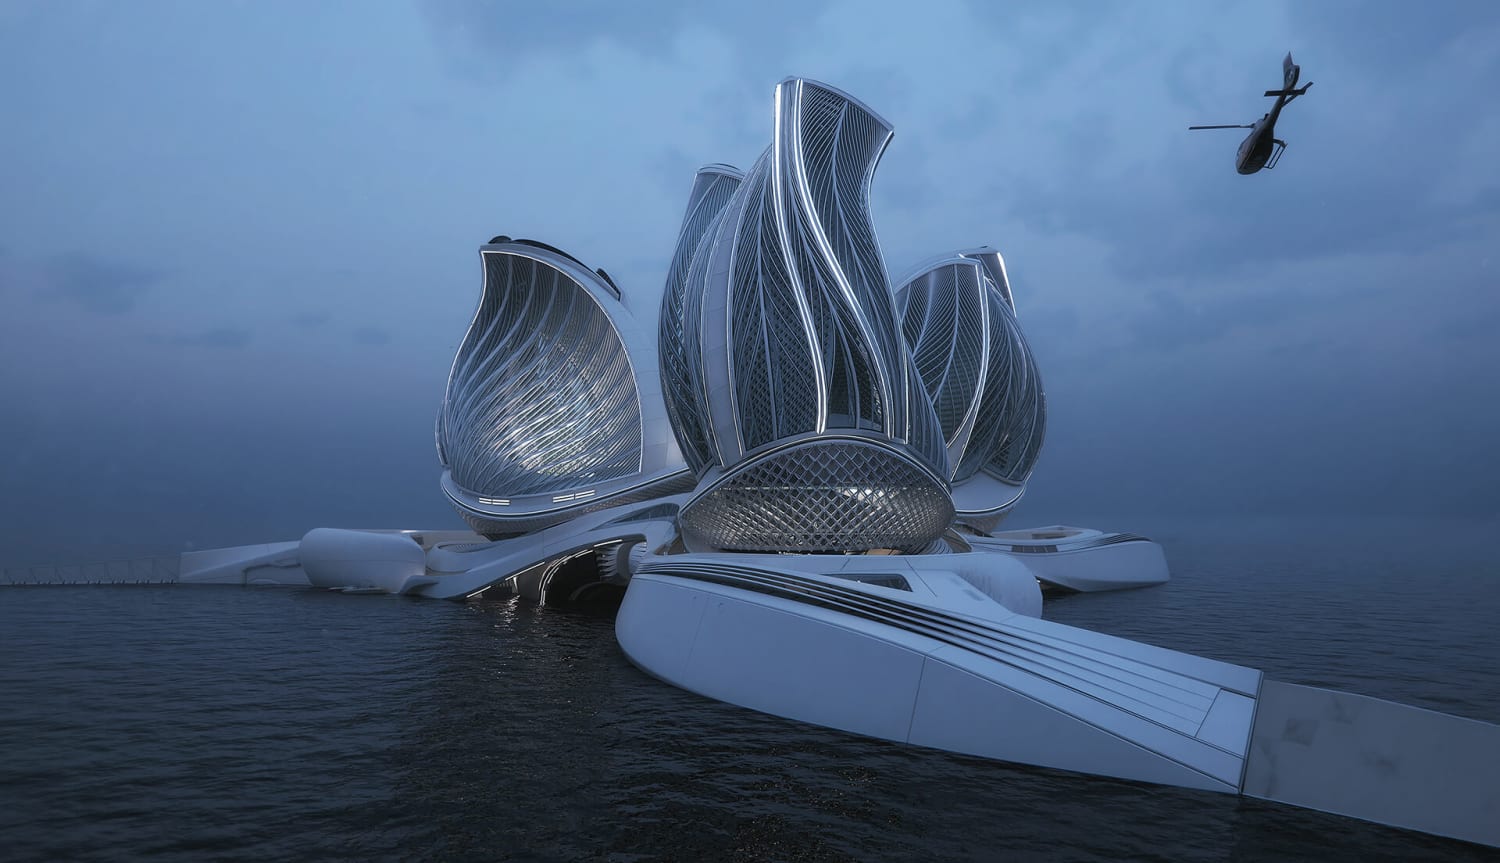 ‘8th Continent’ is an ocean cleaning facility that won the 2020 Grand Prix Award for Architecture and Innovation of the Sea